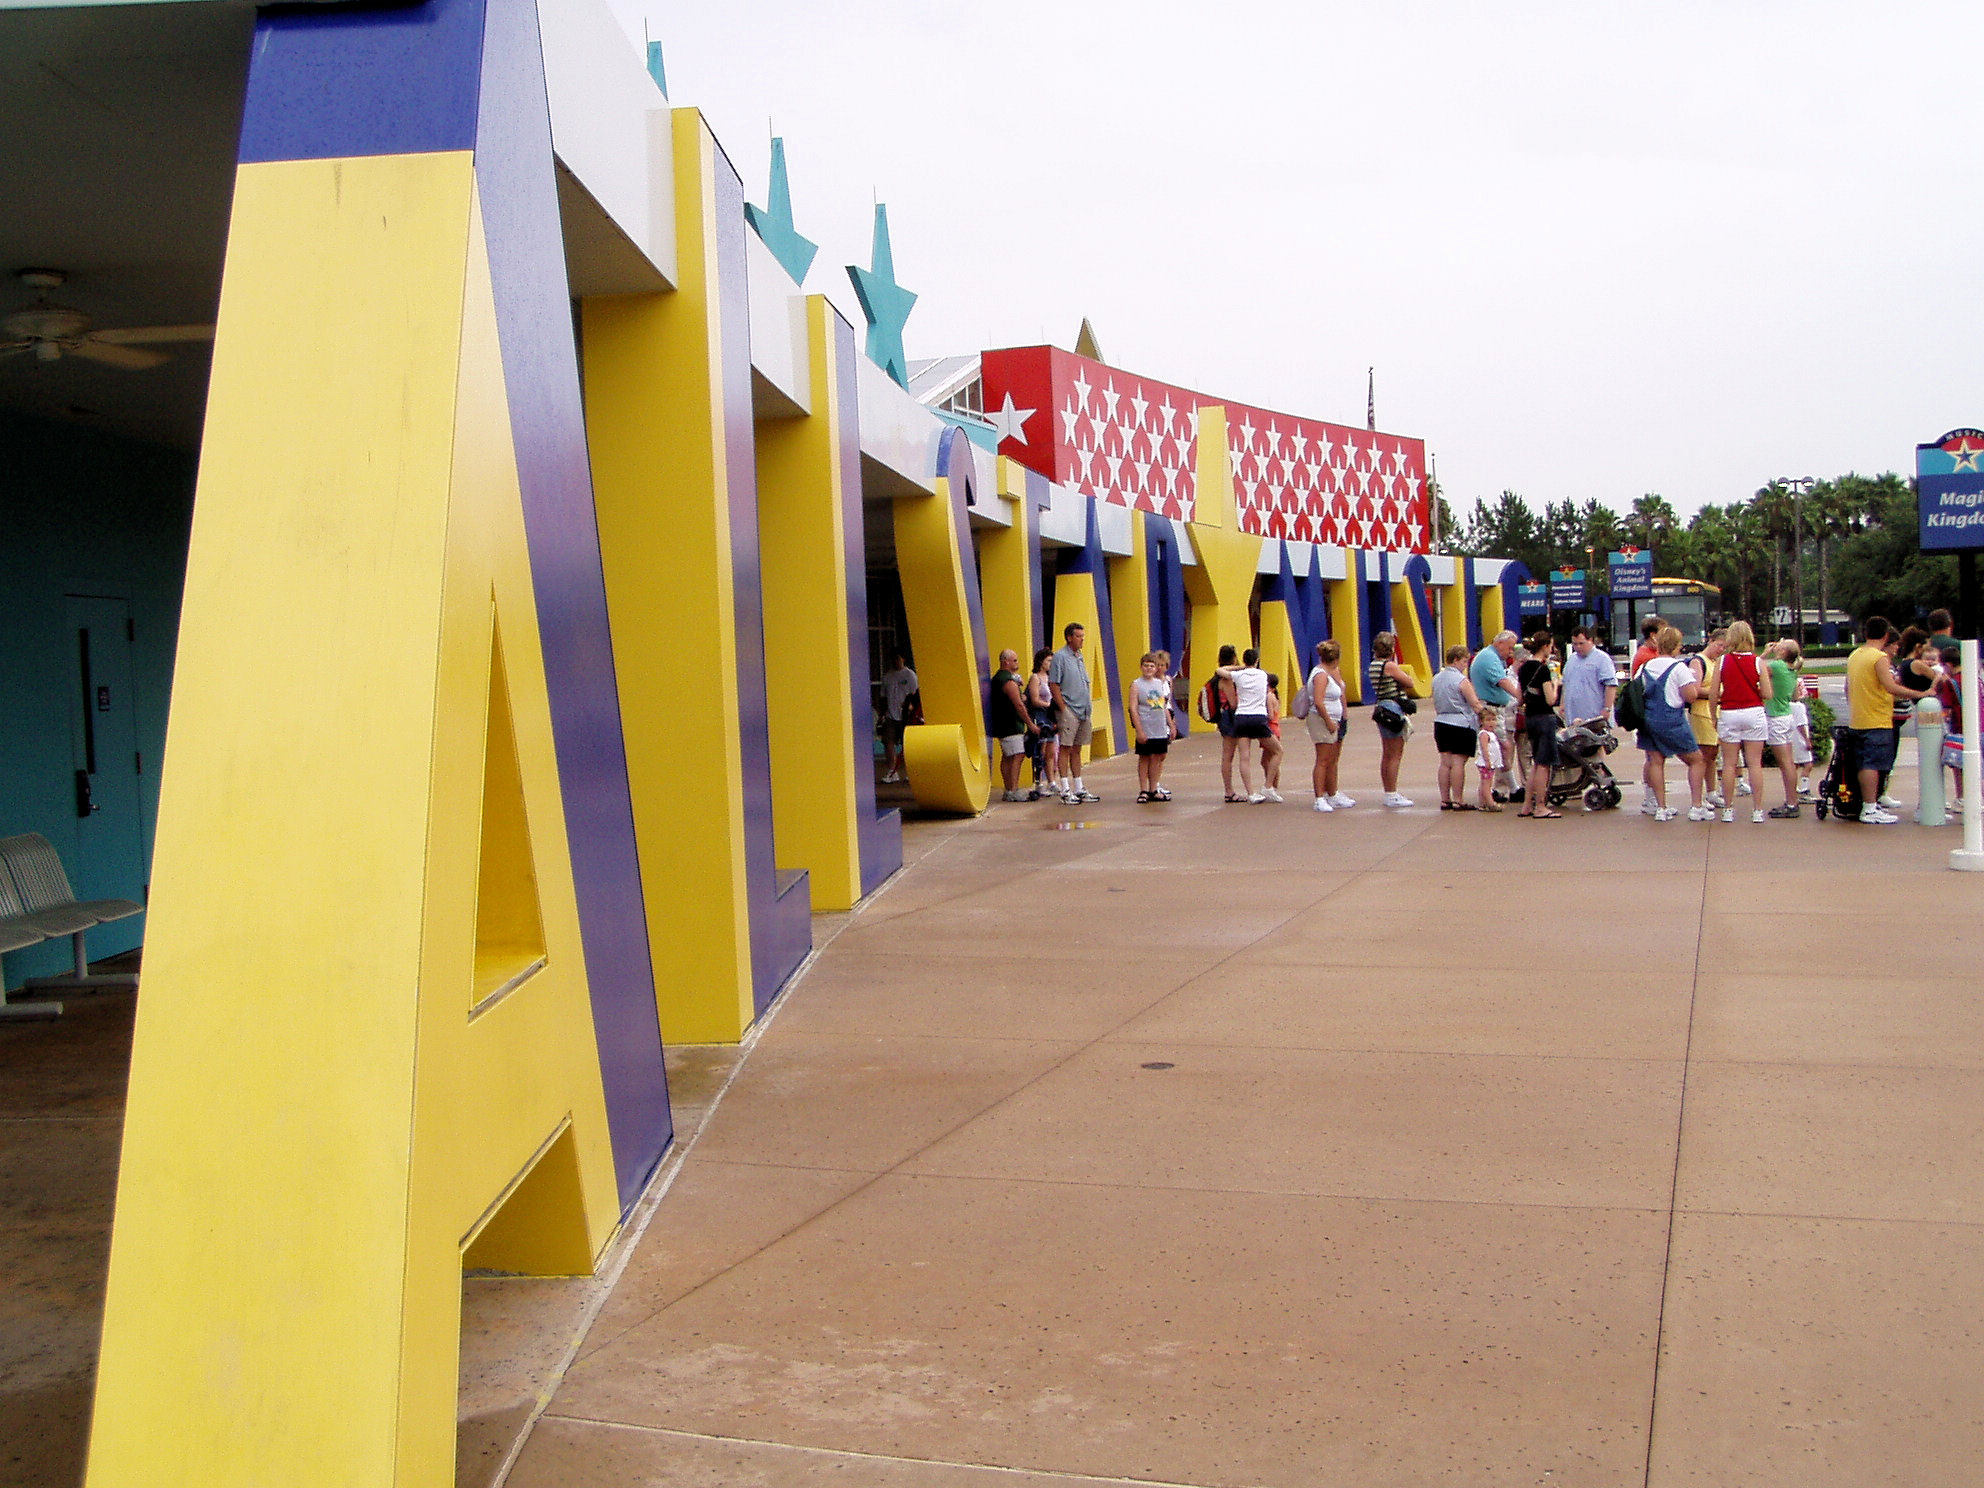 The outside of Disney's All Star Sports, a resort located in the Walt Disney World Resort.